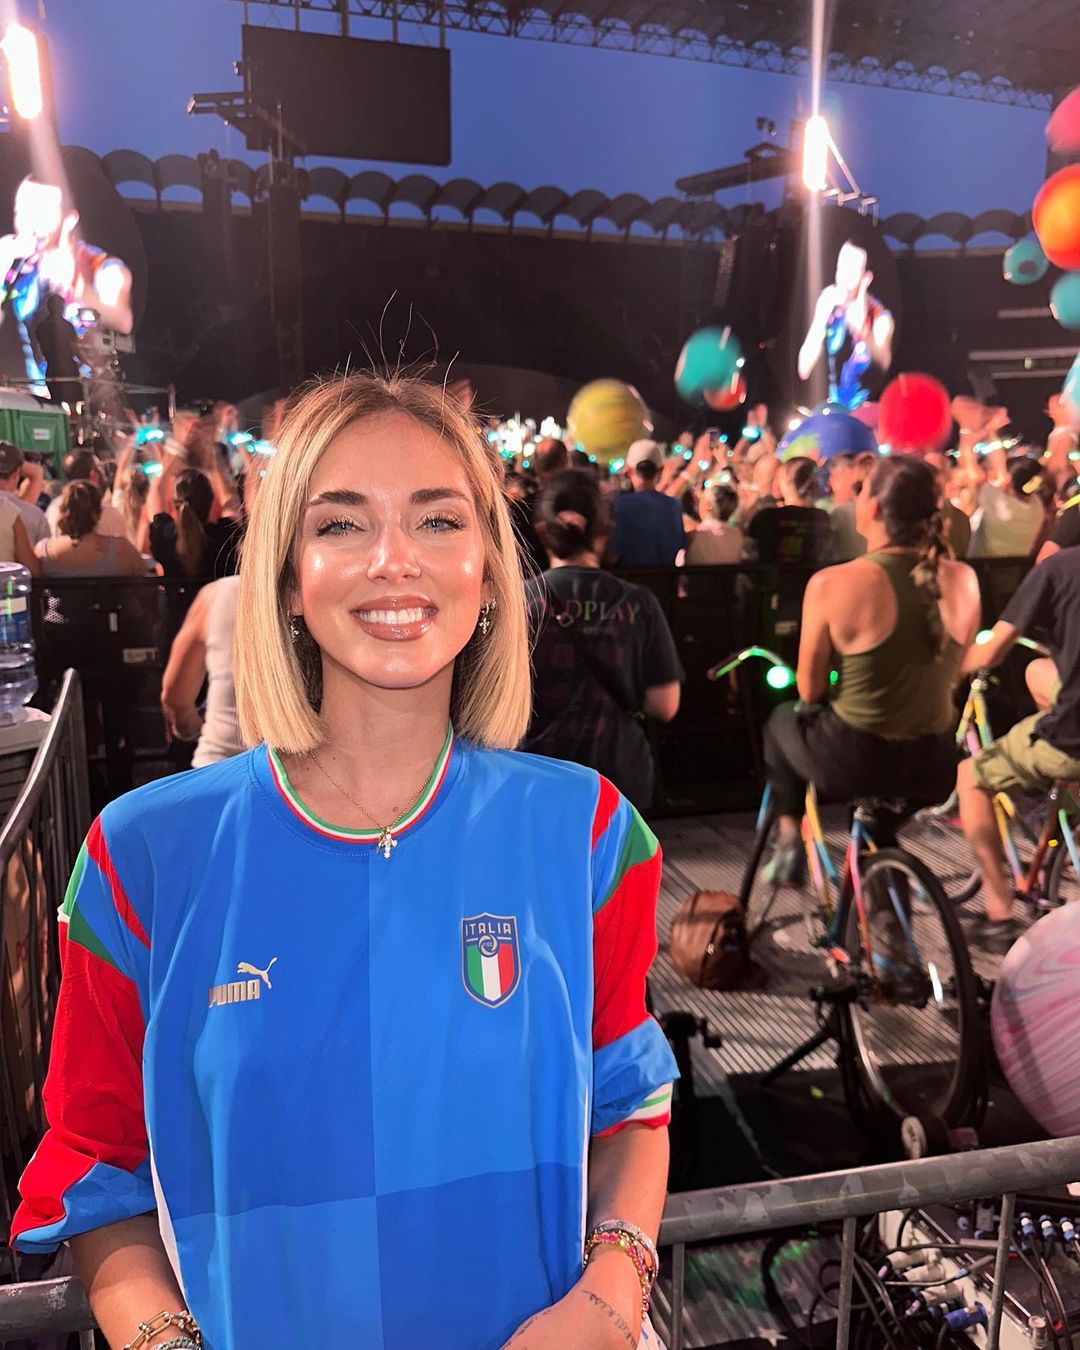 Coldplay, surprise duet with Zucchero at San Siro: Haaland, Chiara Ferragni and Laura Pausini in the audience